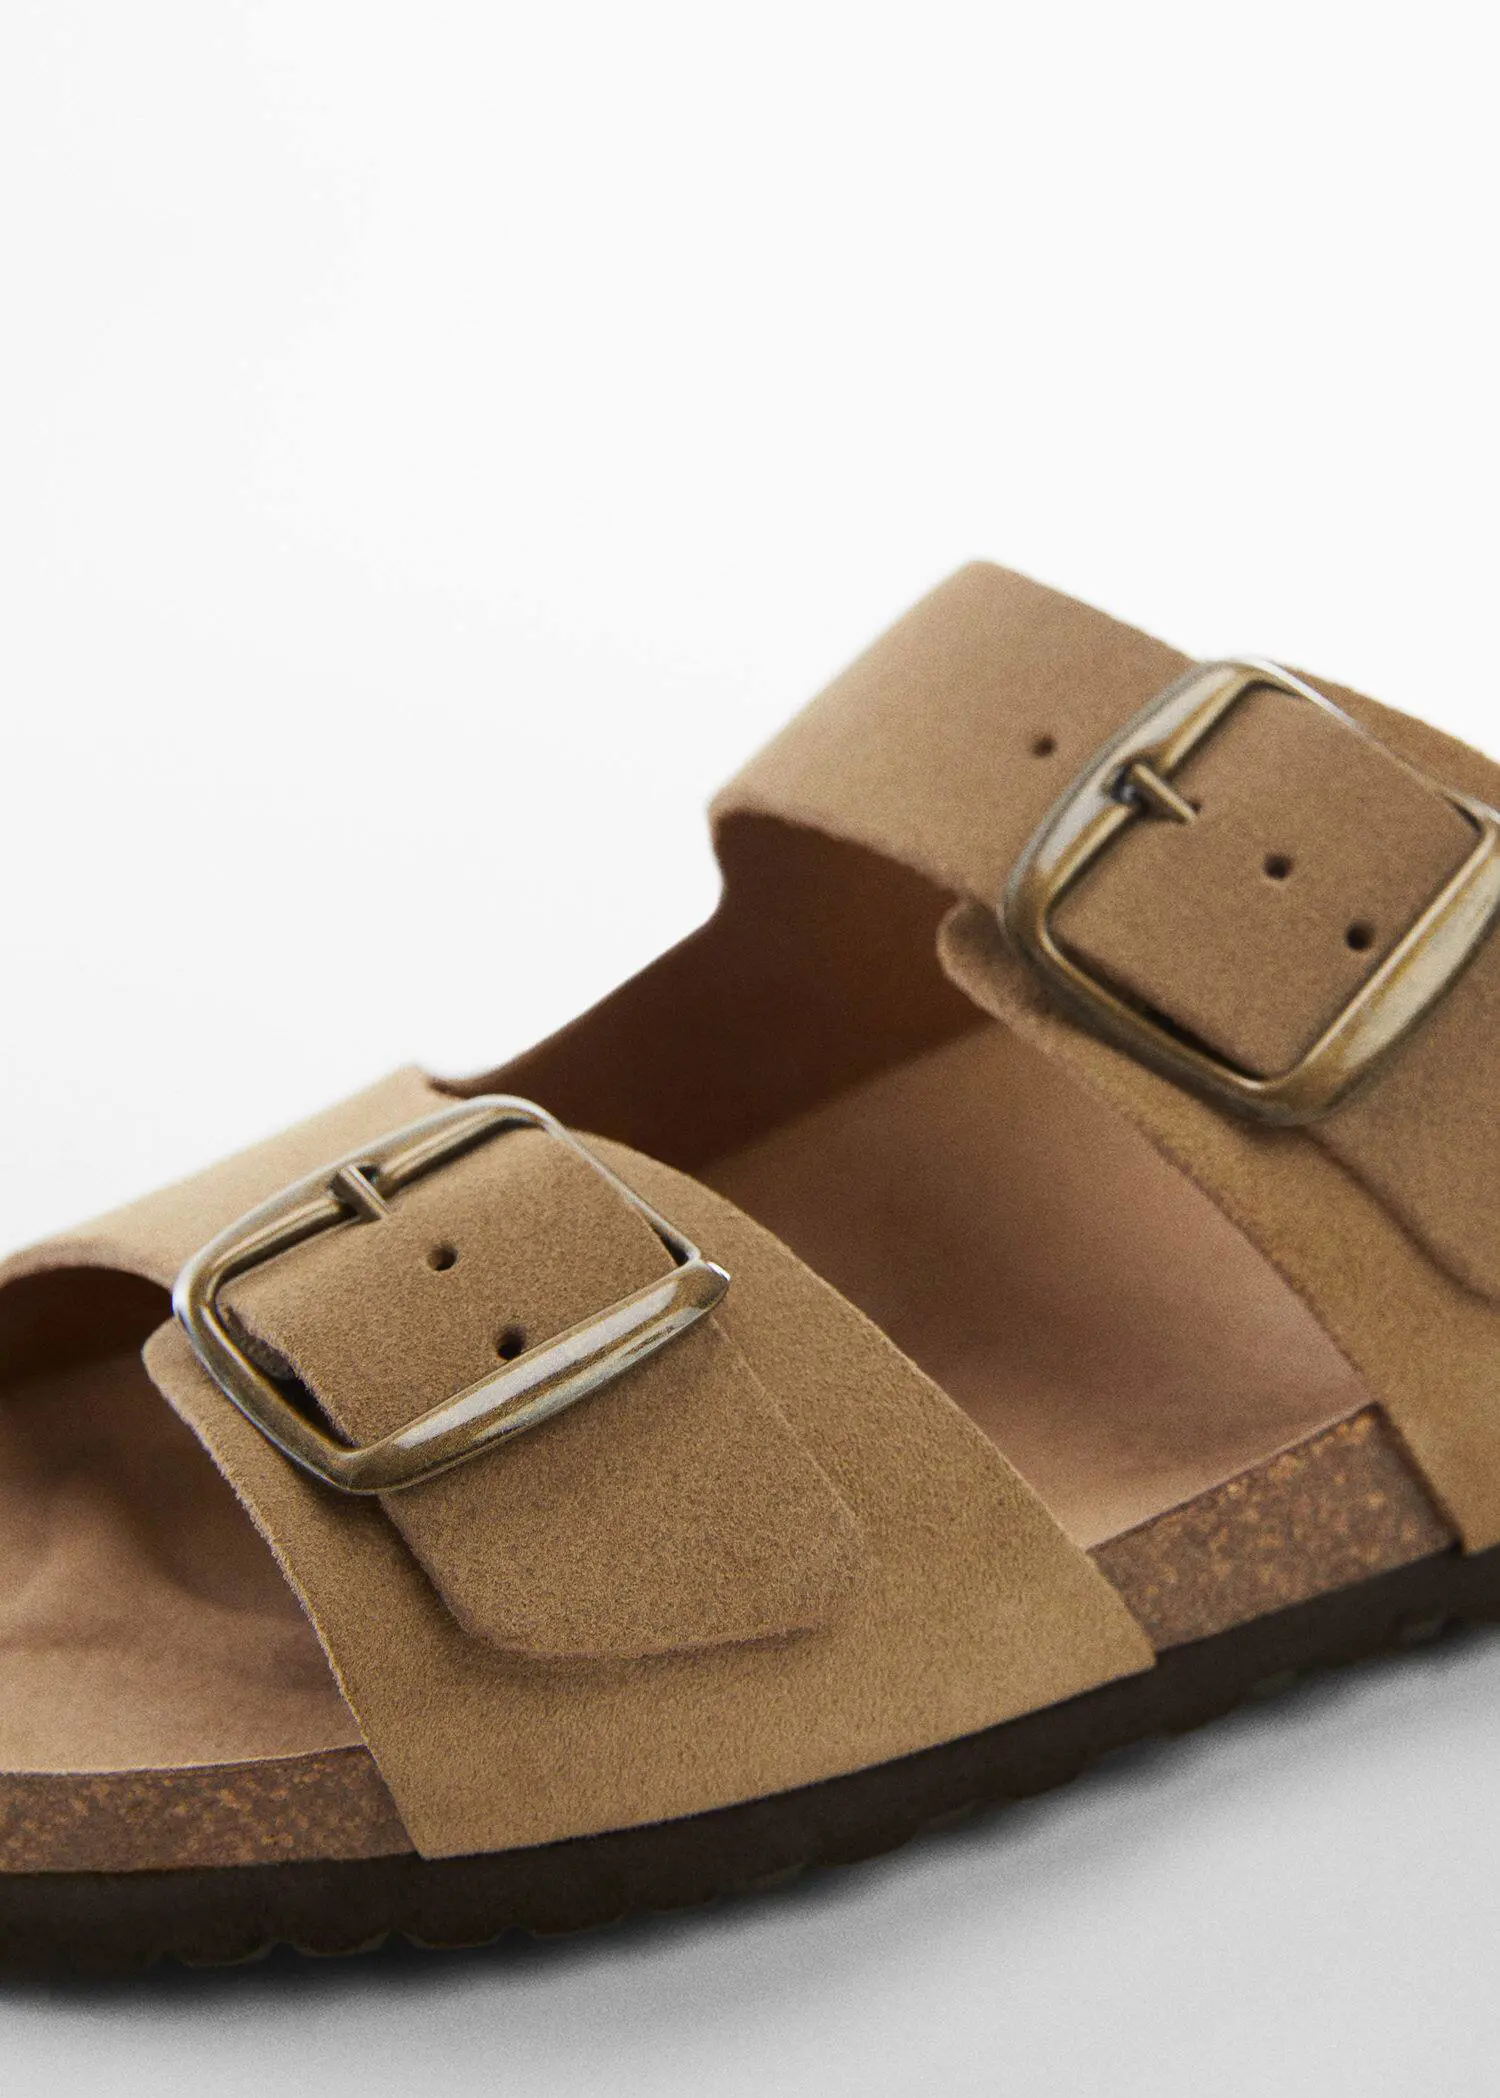 Mango Split leather sandals with buckle. a close up view of a pair of sandals. 